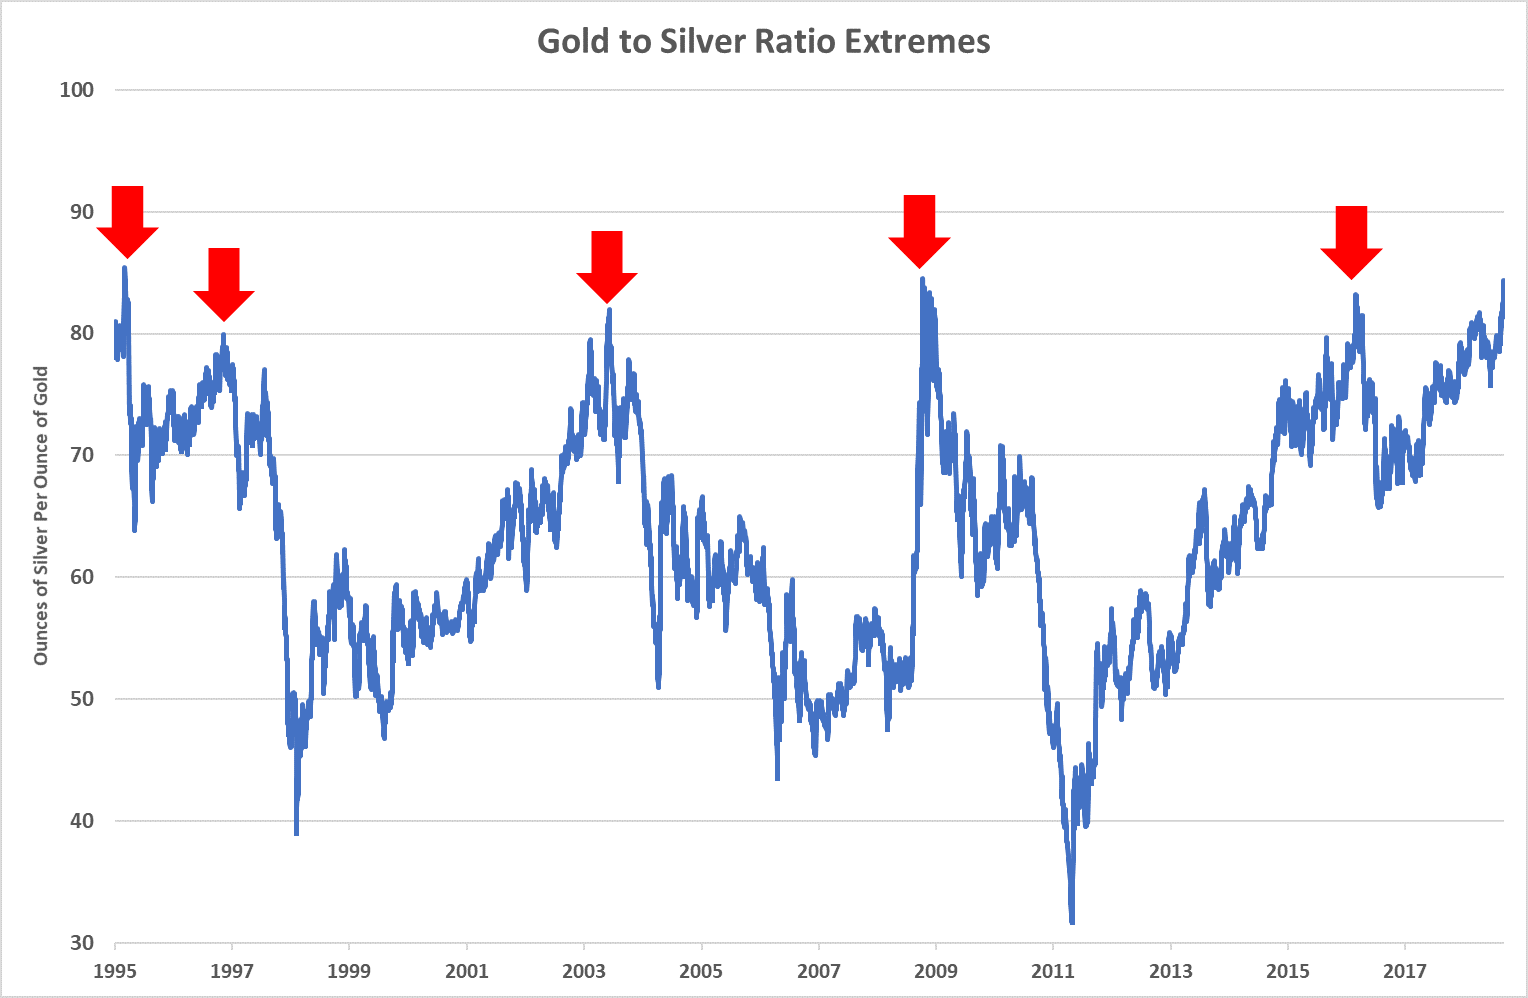 The fear of slowing growth around the world drove the price of silver lower. That said, silver is a great speculation today.